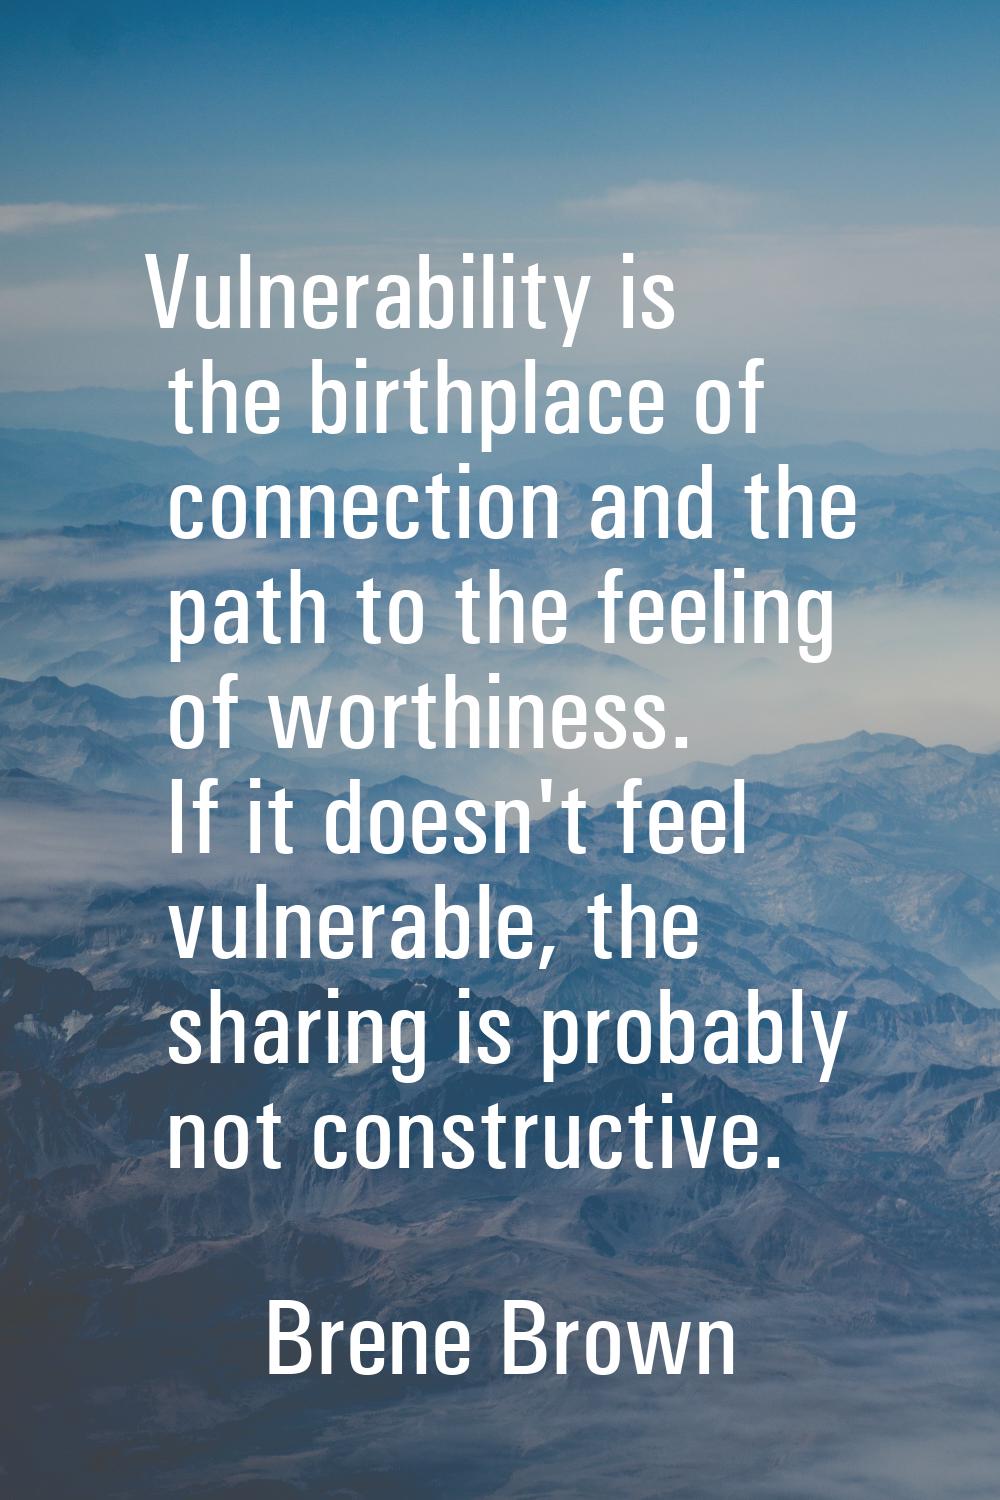 Vulnerability is the birthplace of connection and the path to the feeling of worthiness. If it does